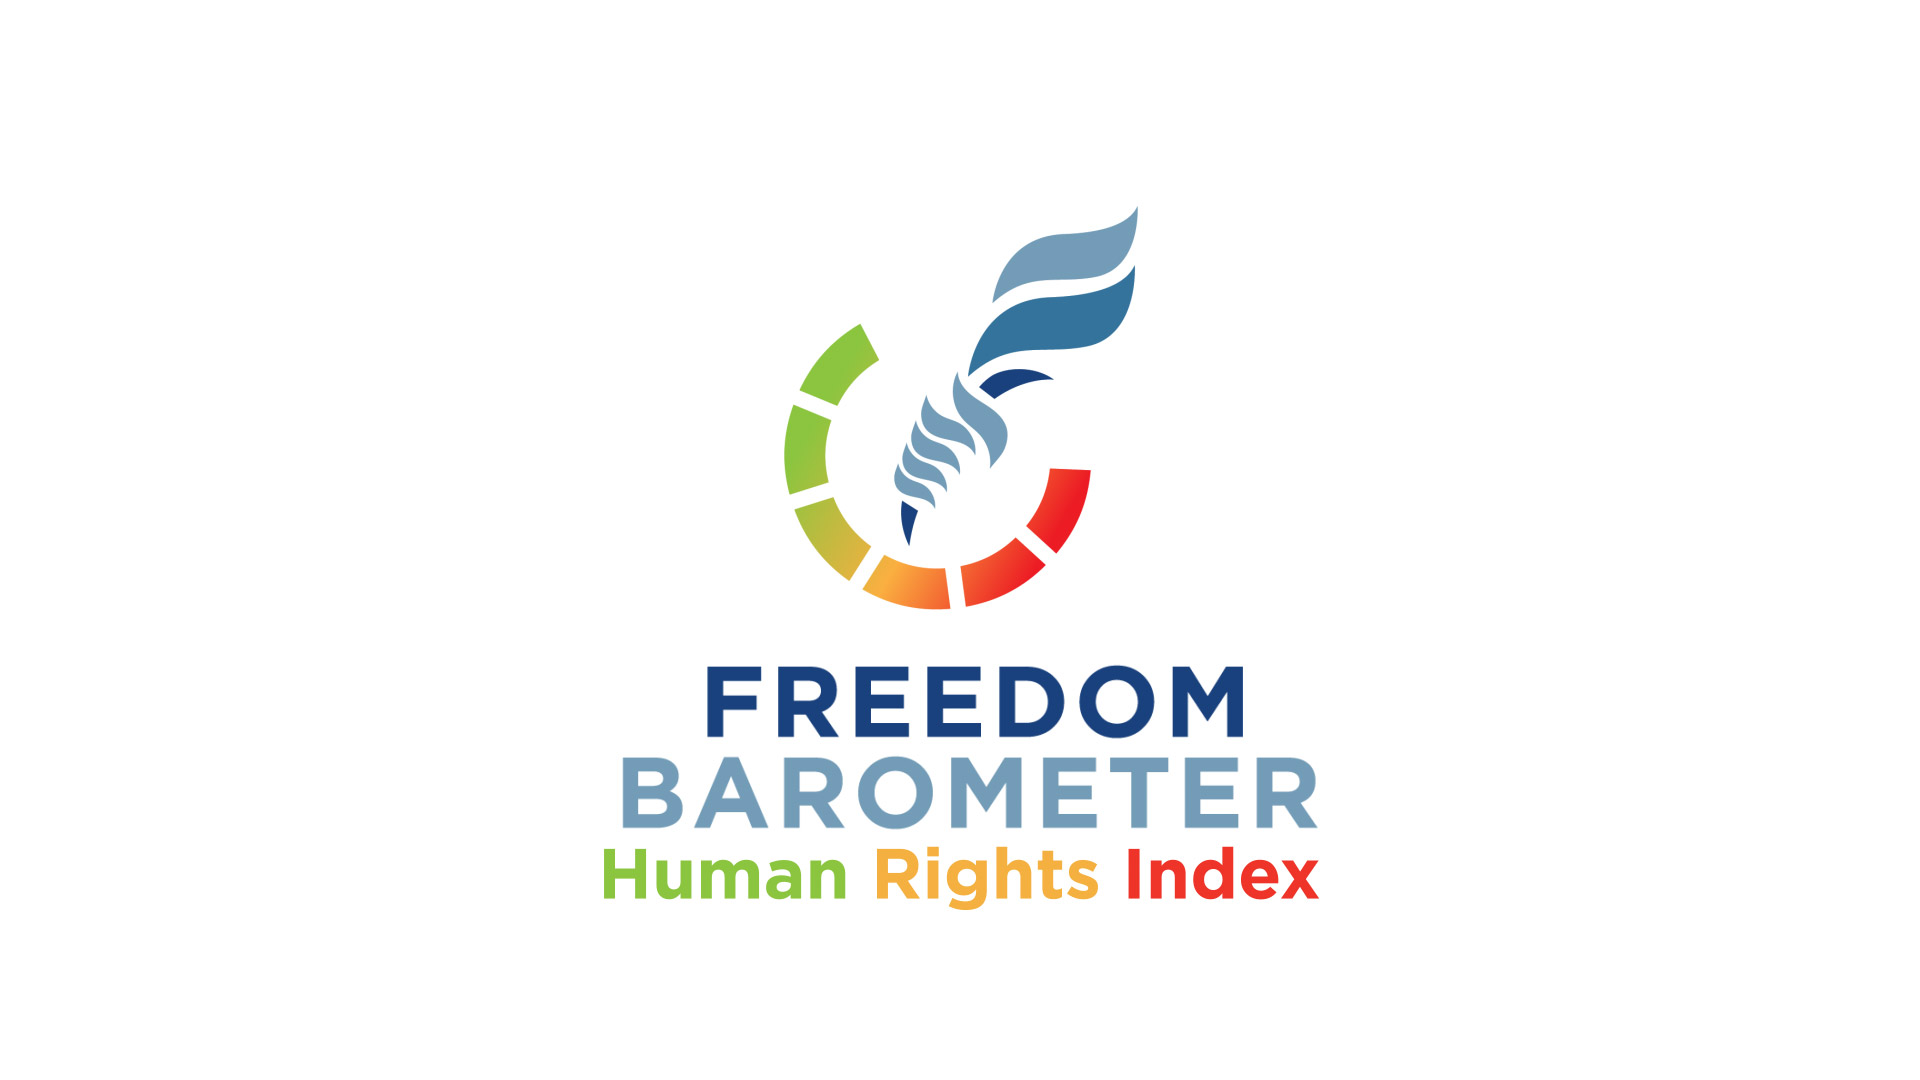 Release of the Human Rights Index